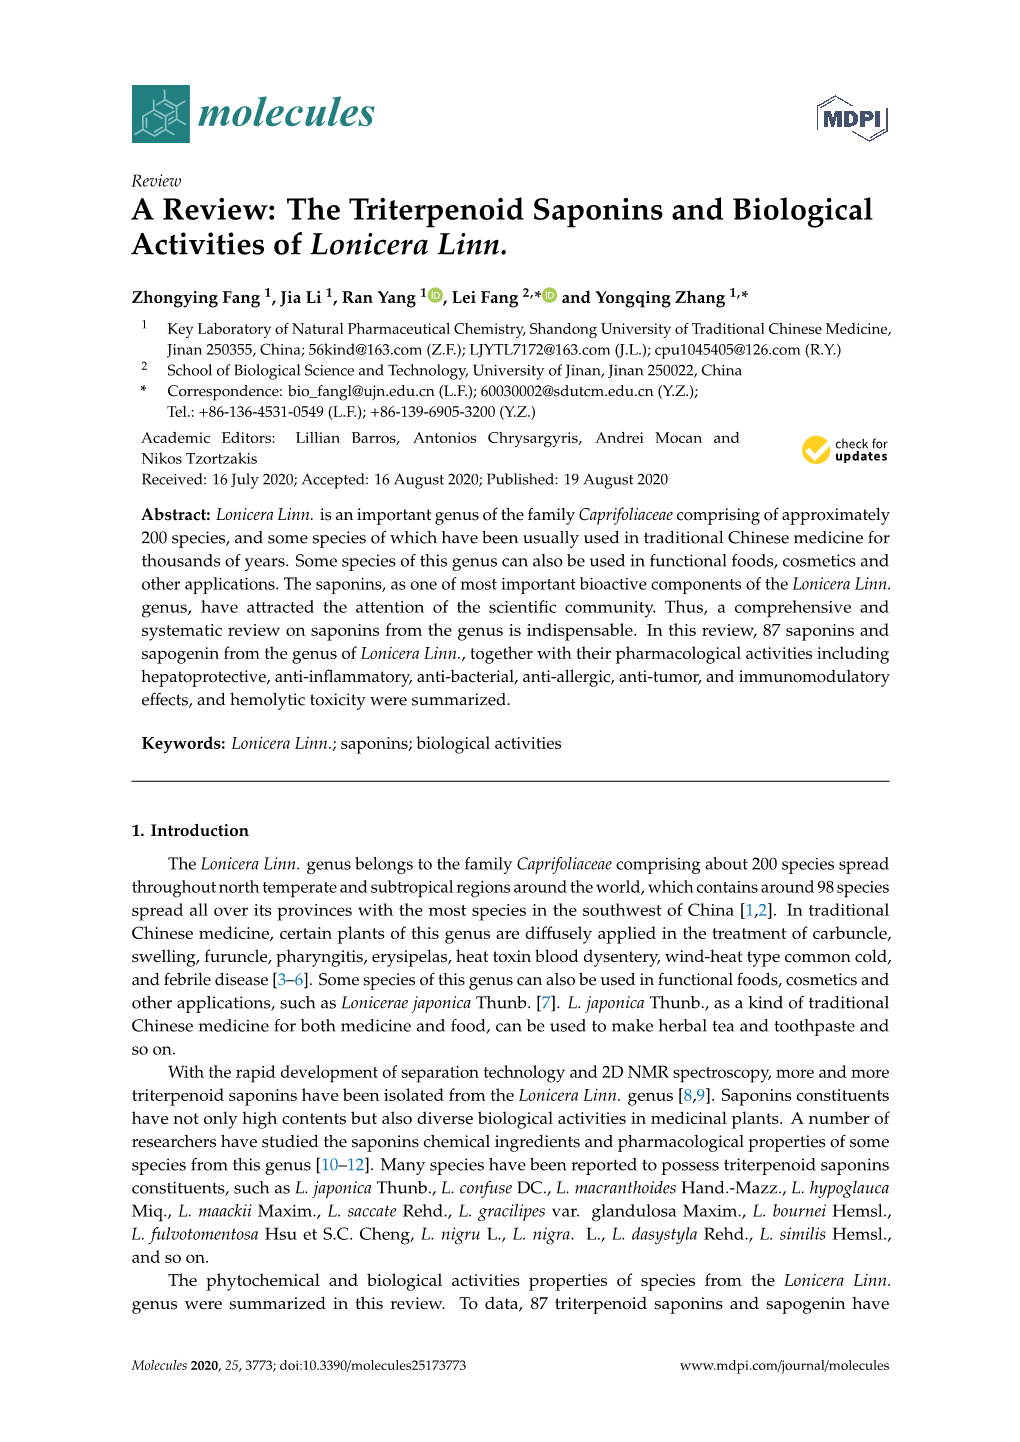 The Triterpenoid Saponins and Biological Activities of Lonicera Linn